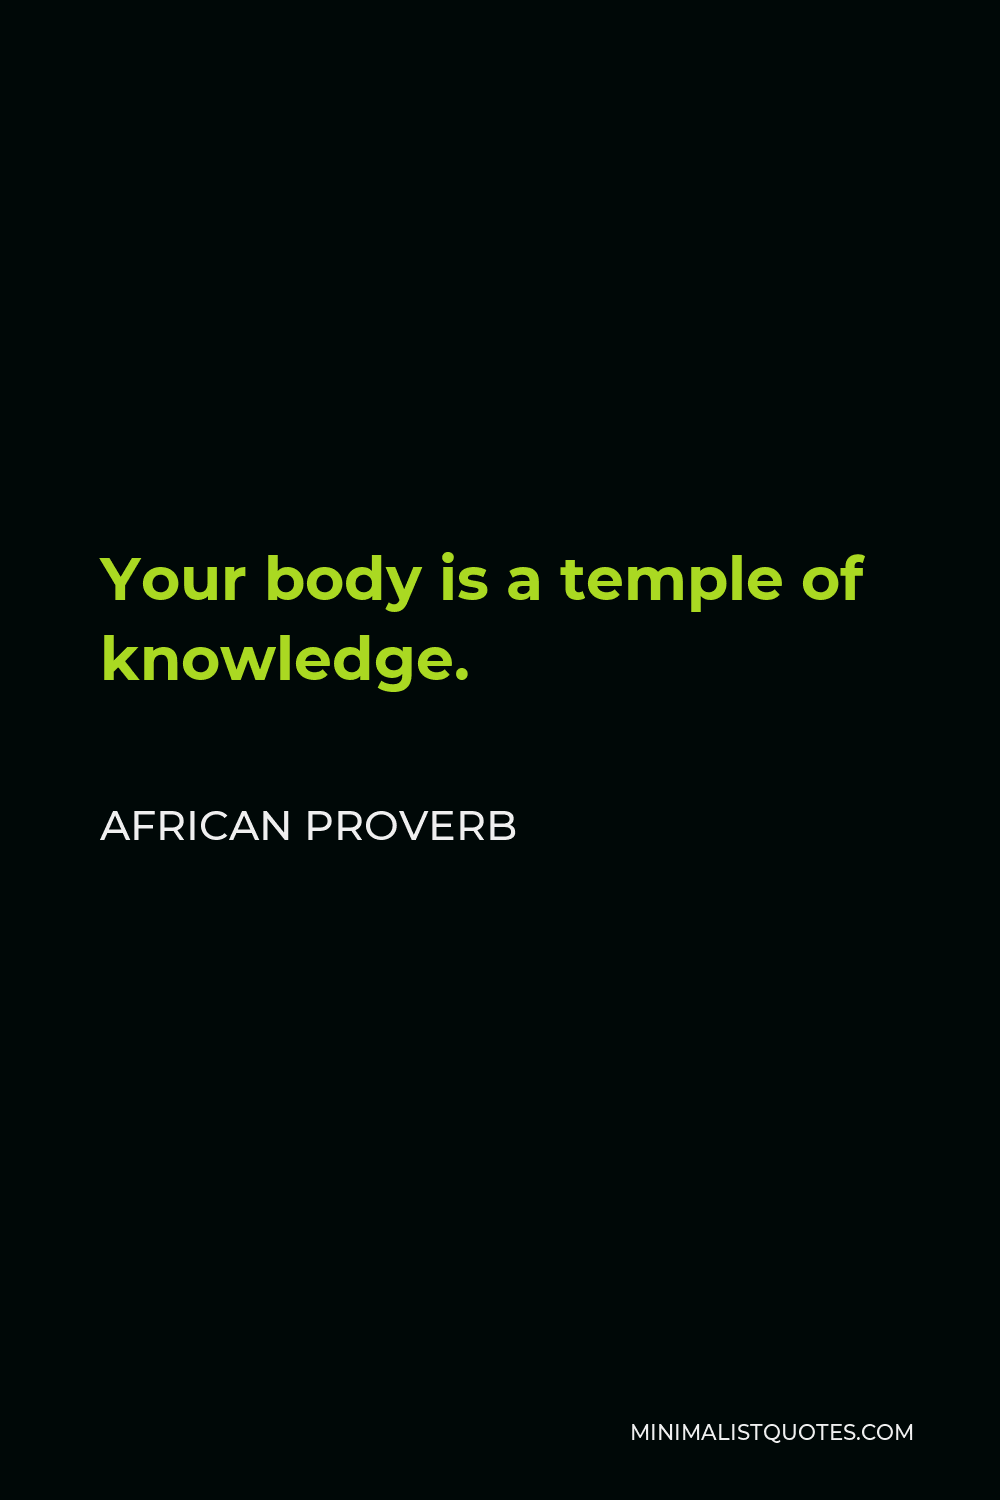 African Proverb Quote - Your body is a temple of knowledge.